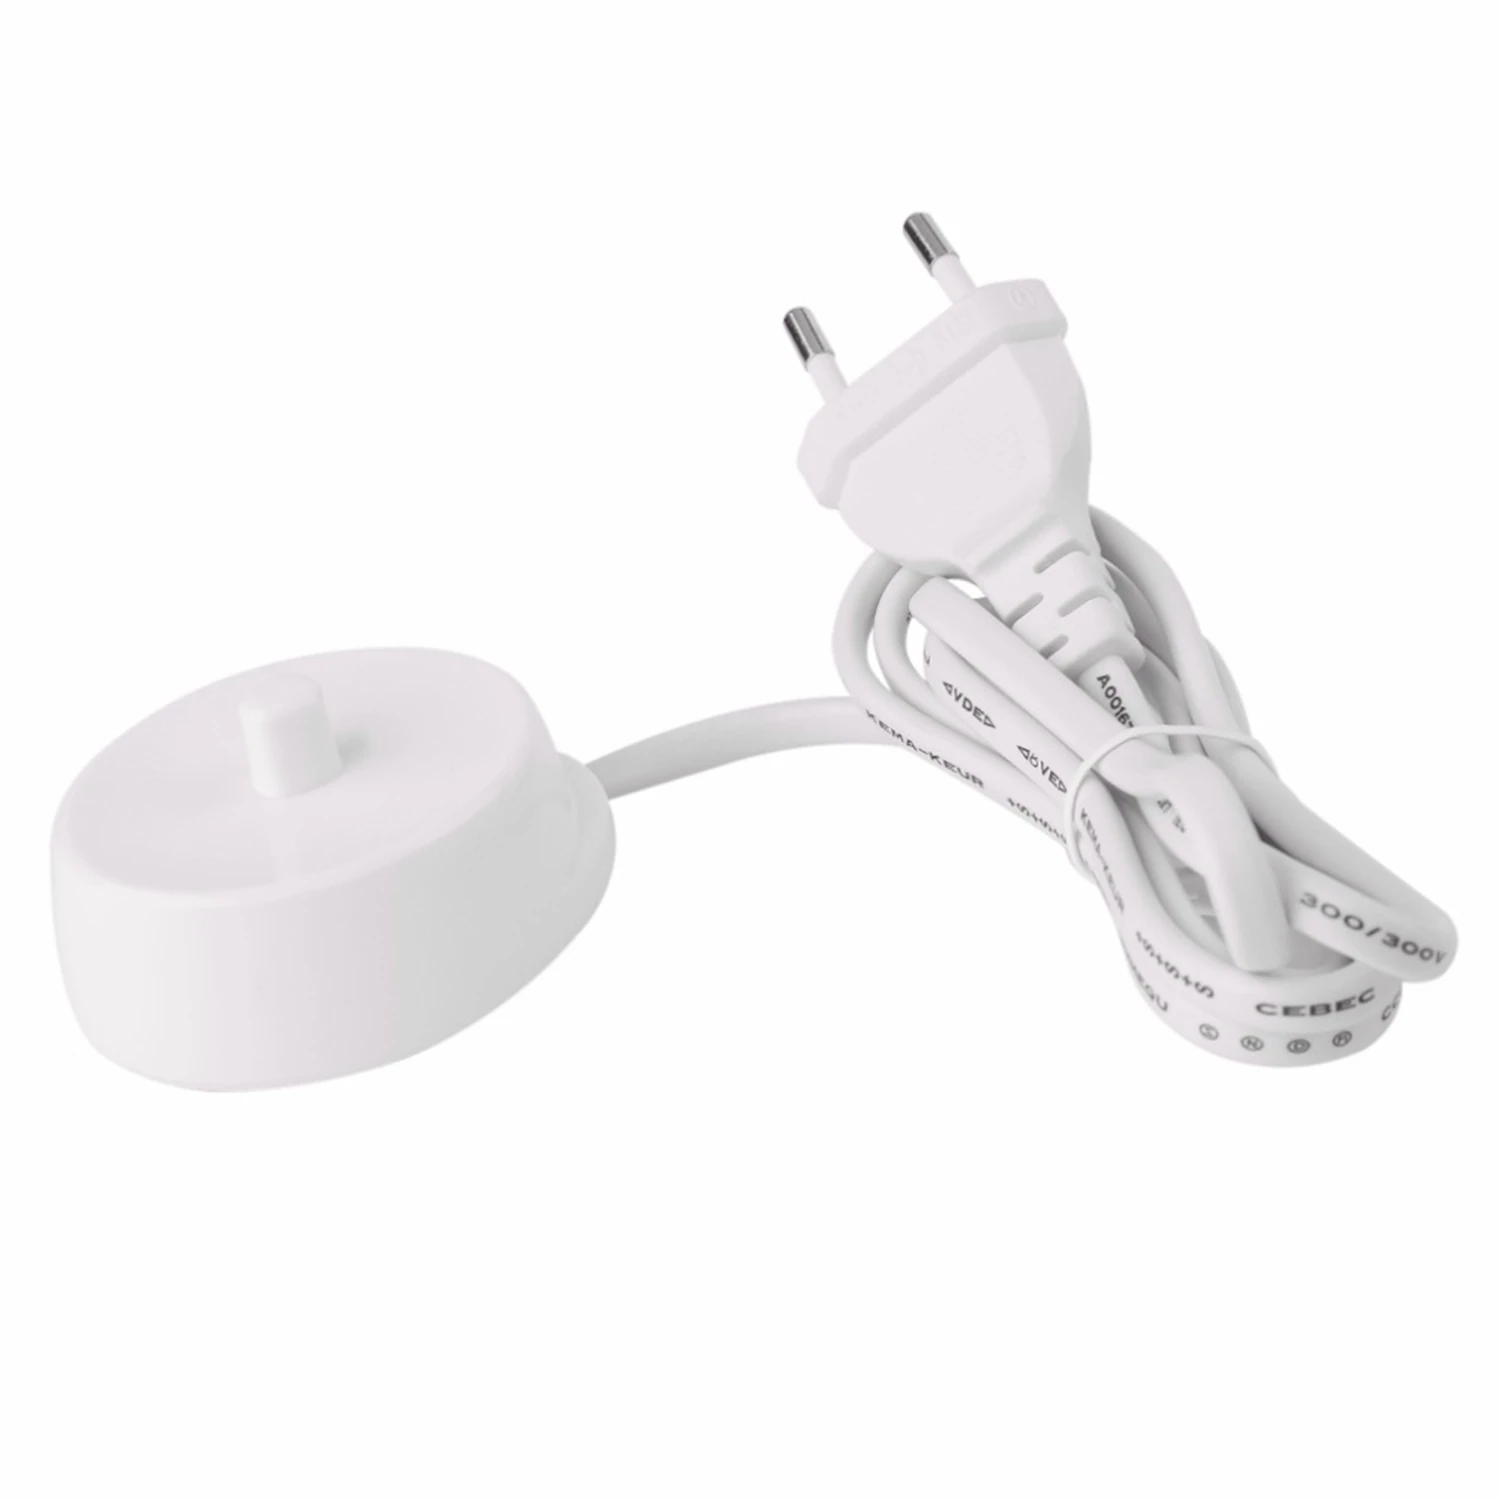 

Replacement Electric Toothbrush Charger Model 3757 Suitable For Braun Oral-B D17 Oc18 Toothbrush Charging Cradle Eu Plug